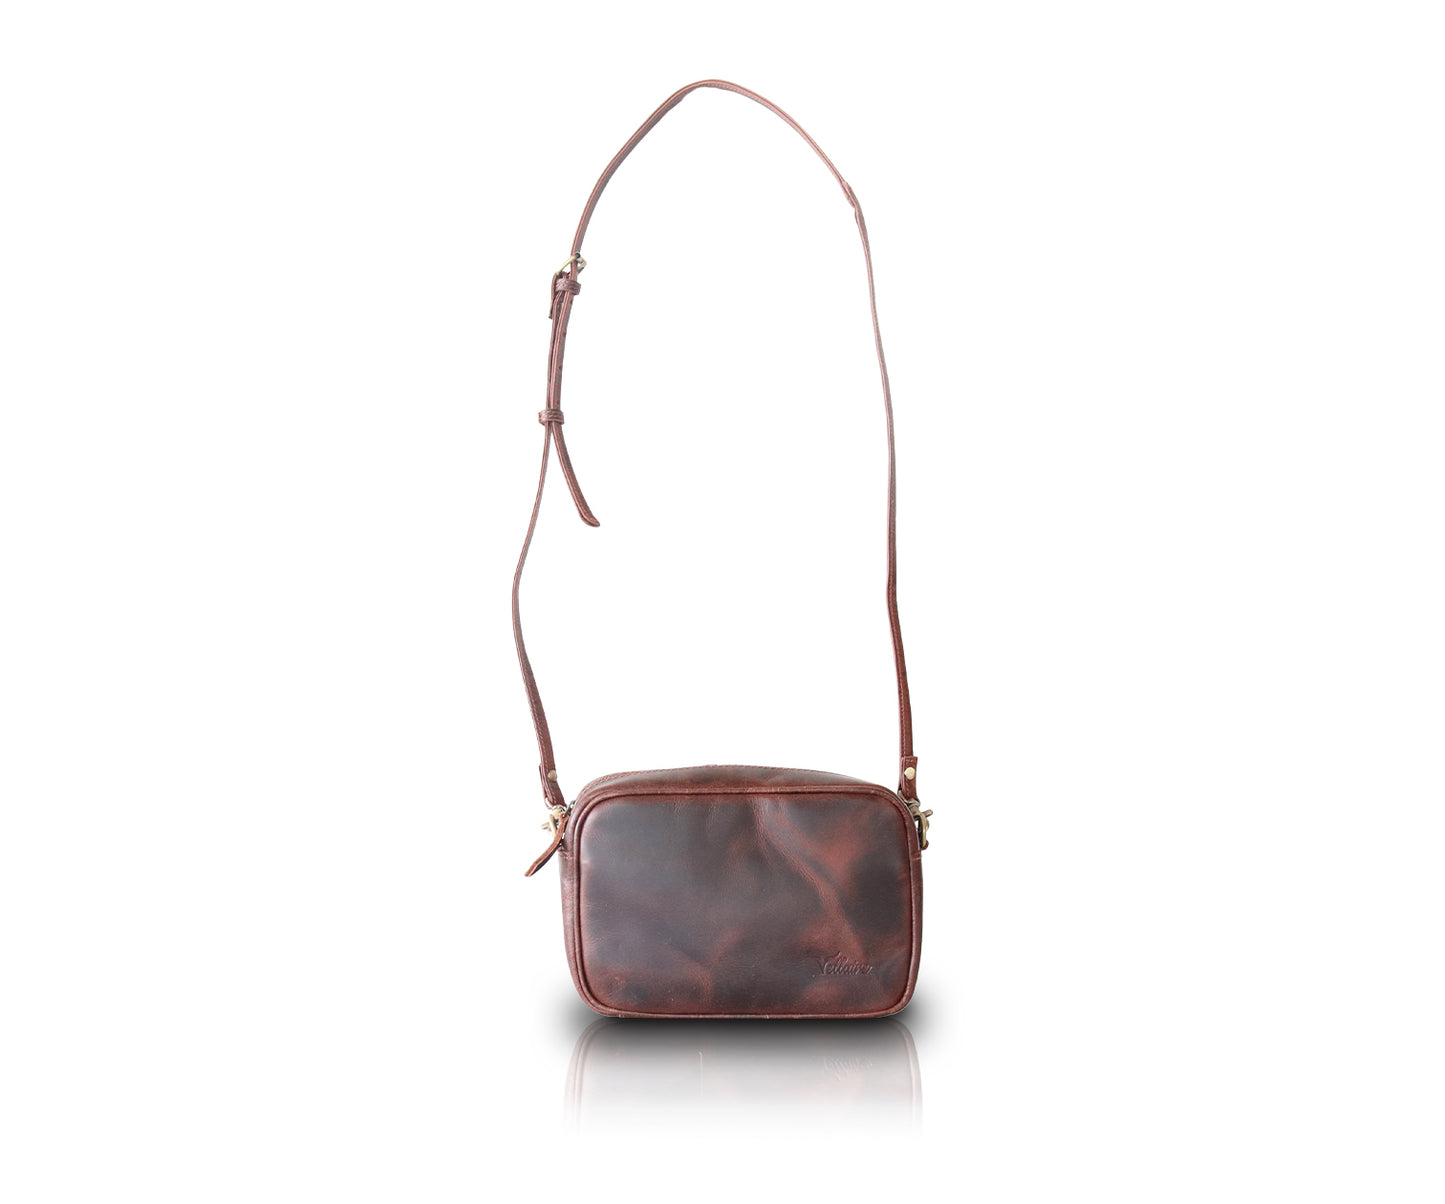 Leather Small Zippered Bag - Antique Brown